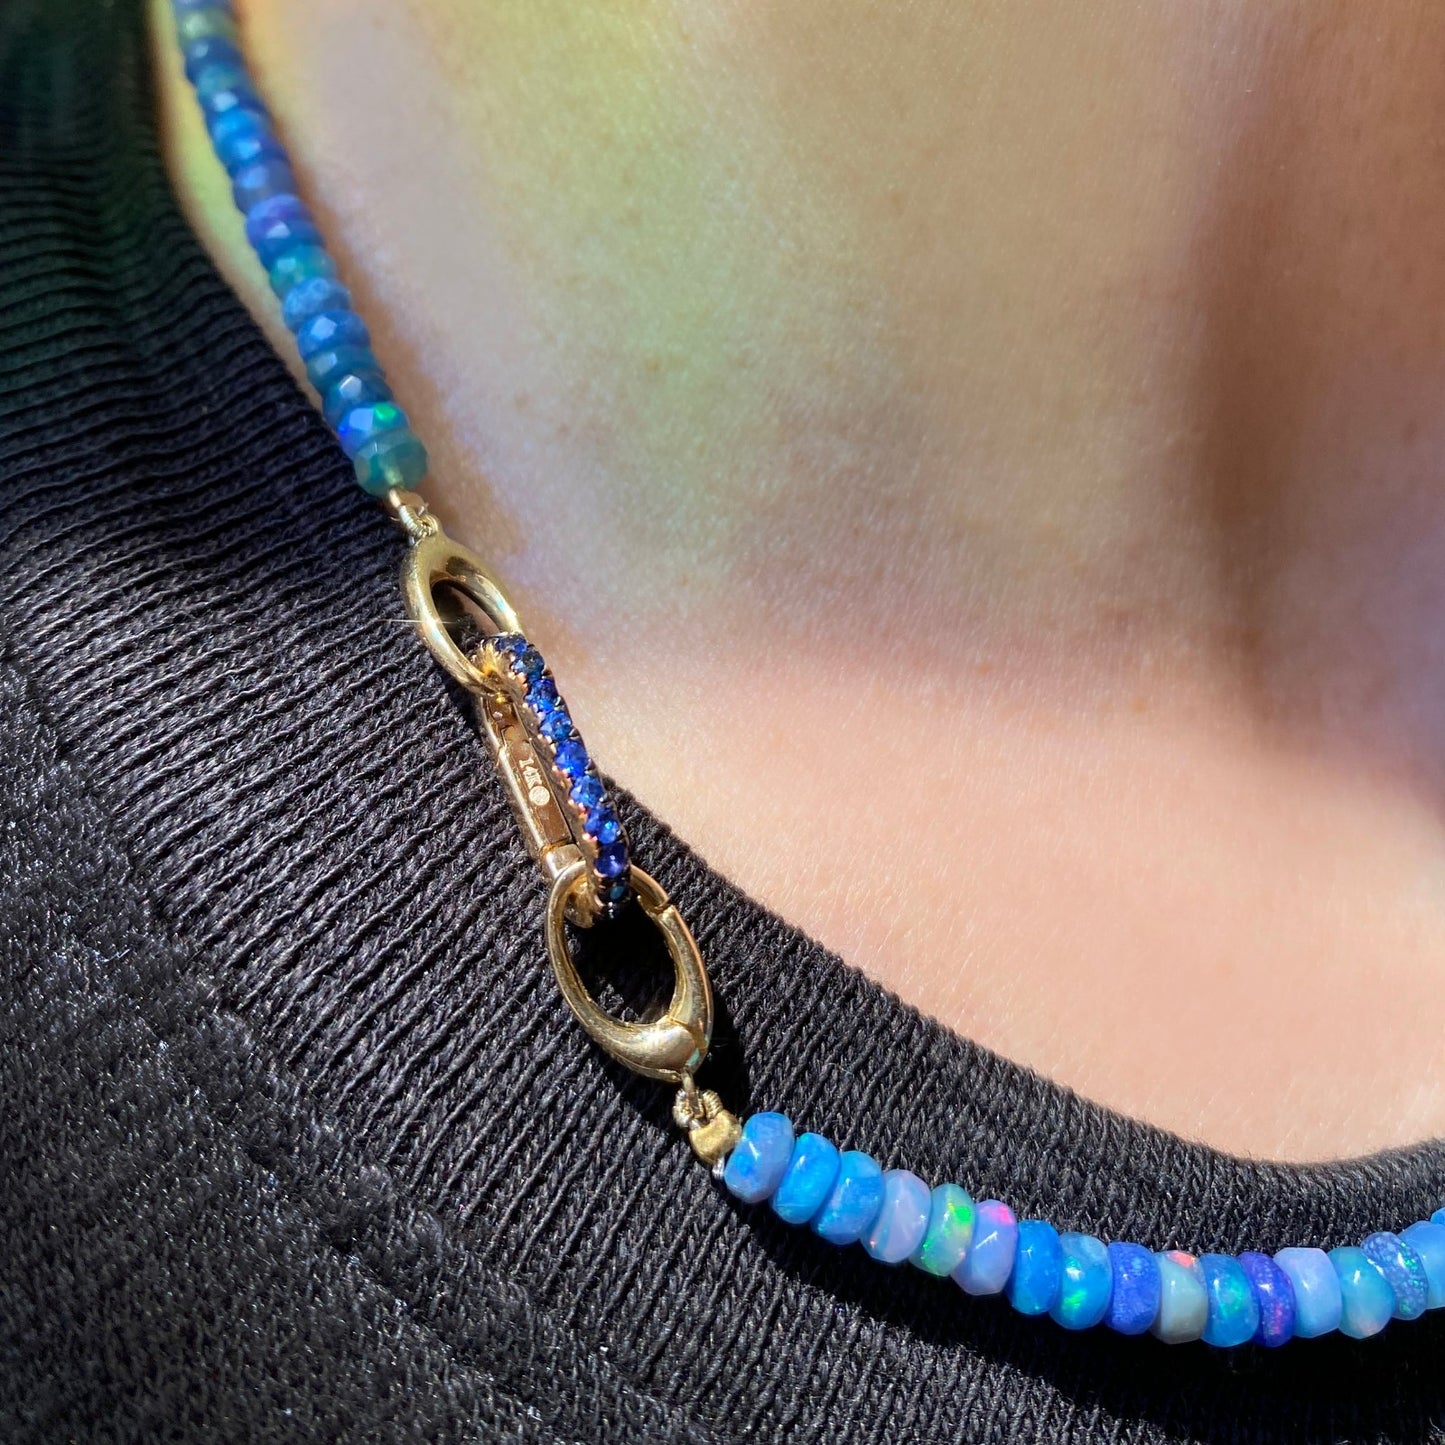 14k yellow gold oval locking charm with blue stones. Styled on a neck locked onto oval clasps of a beaded necklace.